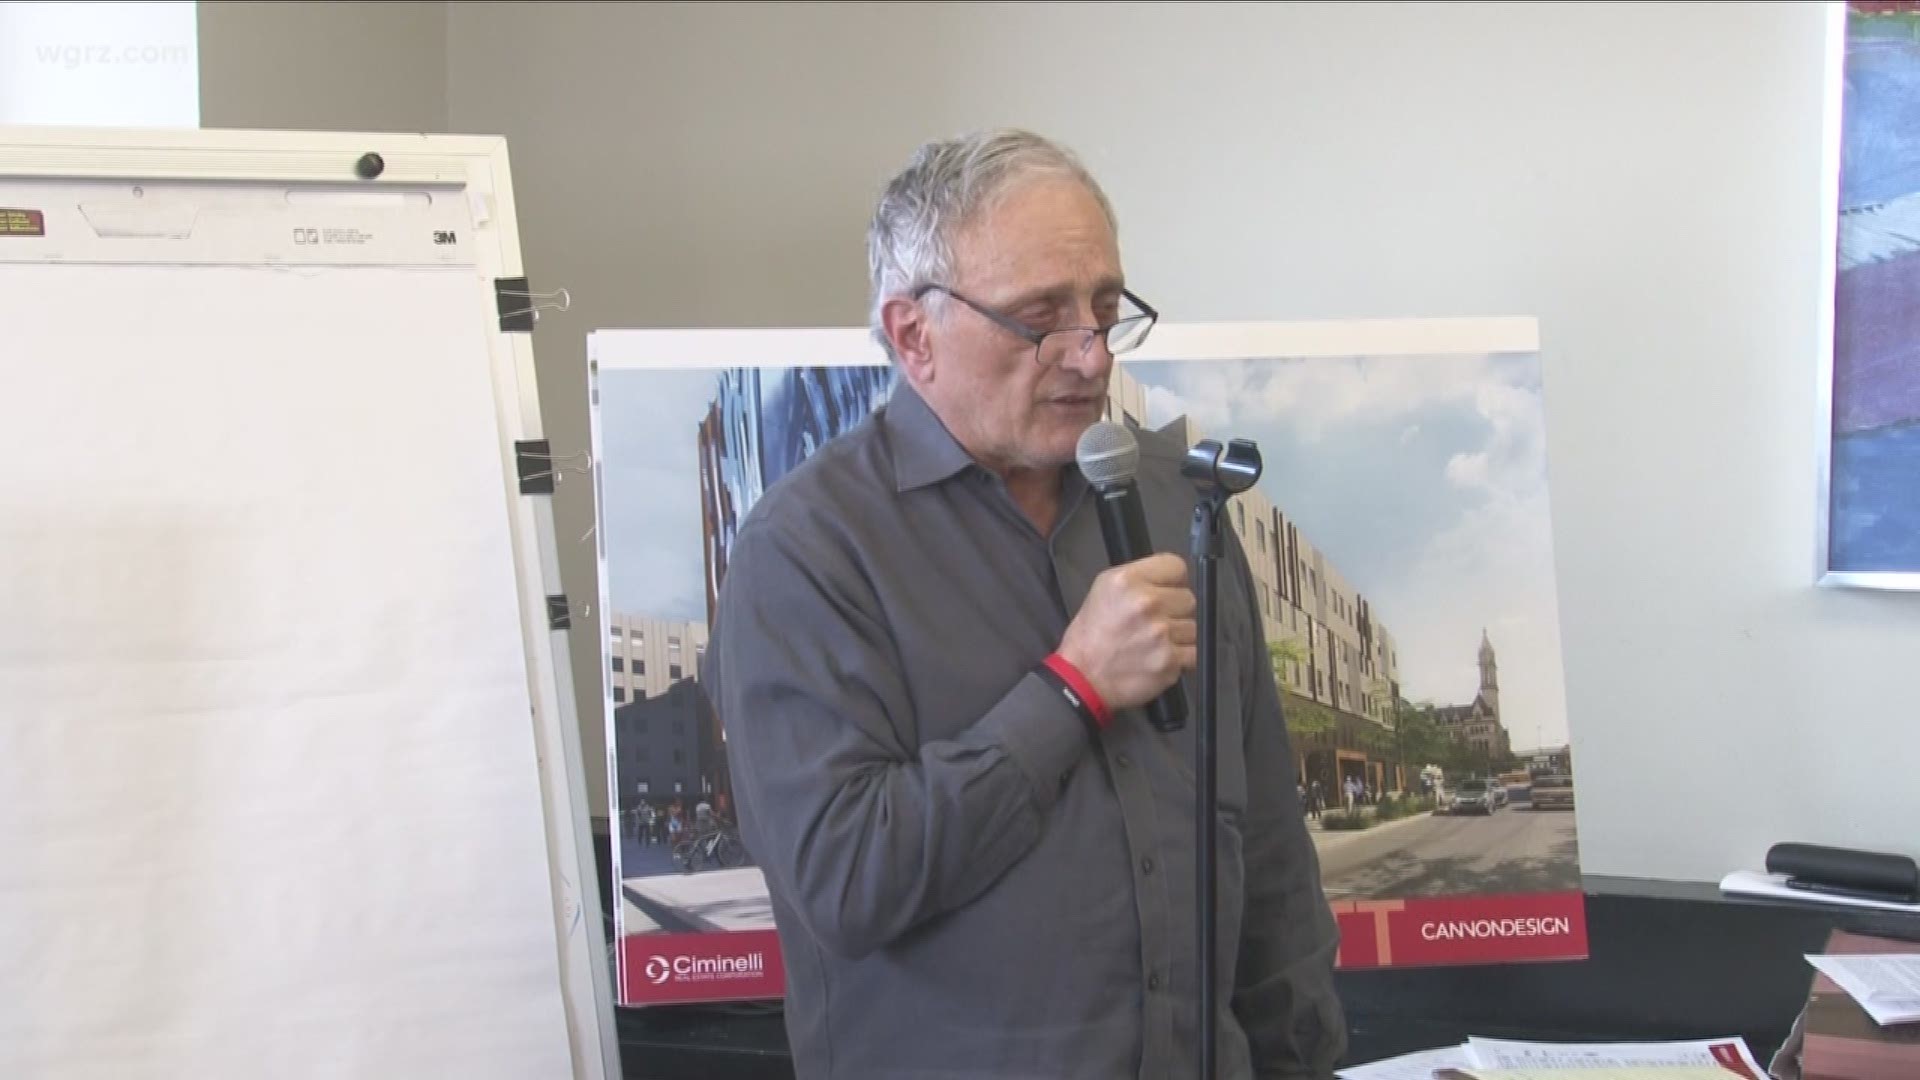 paladino upset with the lack of parking the proposal has.